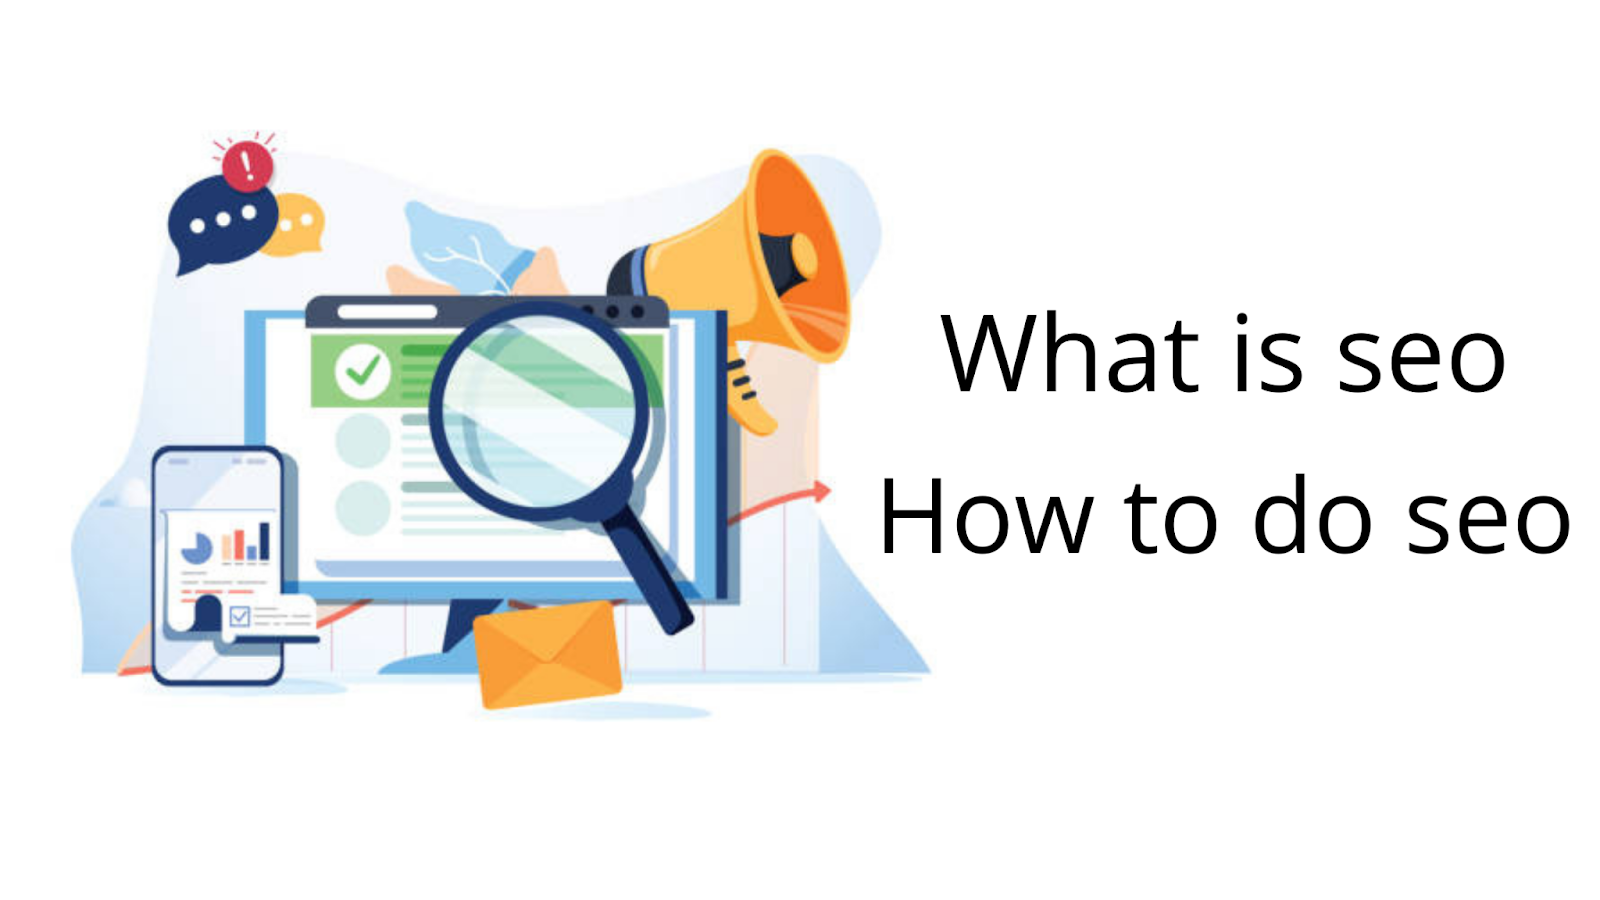 what is seo how to do seo | Blogger SEO in english | what is seo, how to do | Blogger SEO Settings